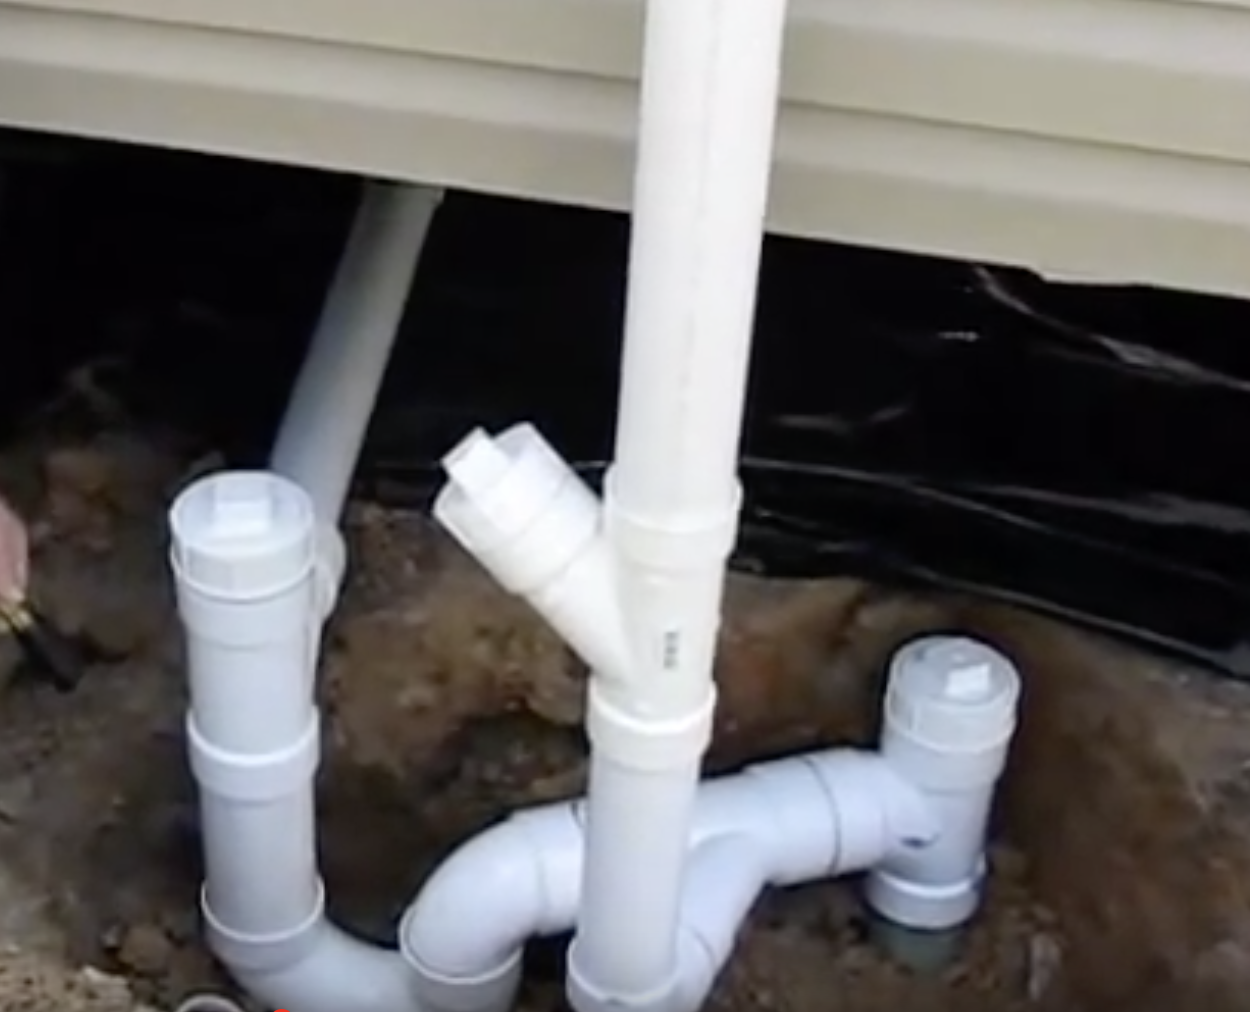 Plumbing Basics For Manufactured Homes